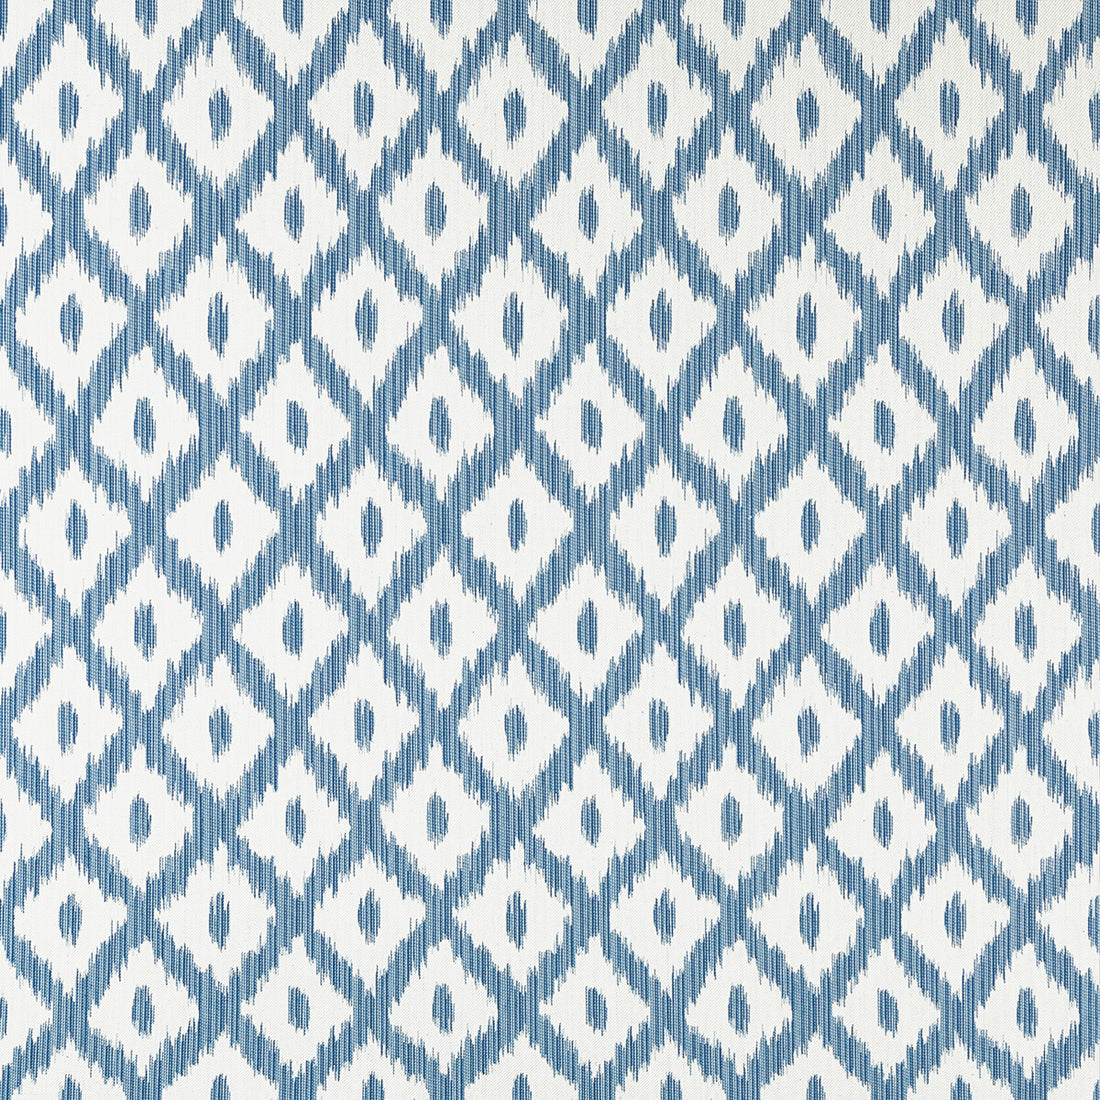 Pitigala fabric in chambray color - pattern 35762.15.0 - by Kravet Basics in the Ceylon collection